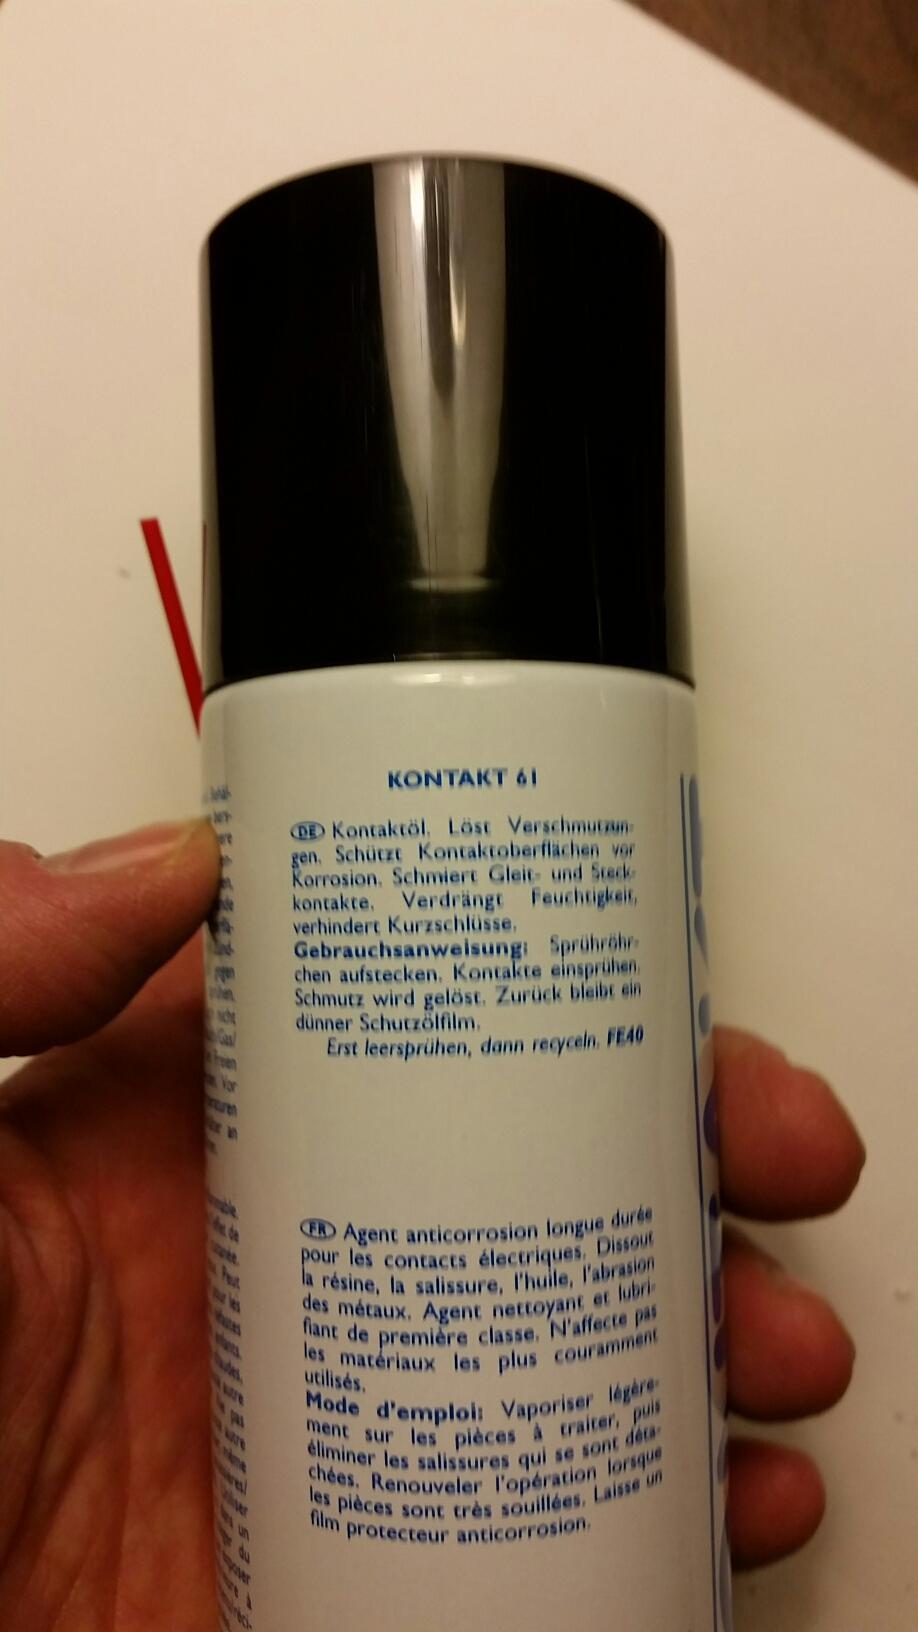 Kontakt-61. Text on can reads: Protects contacts from corrosion, lubricates pickup contacts.